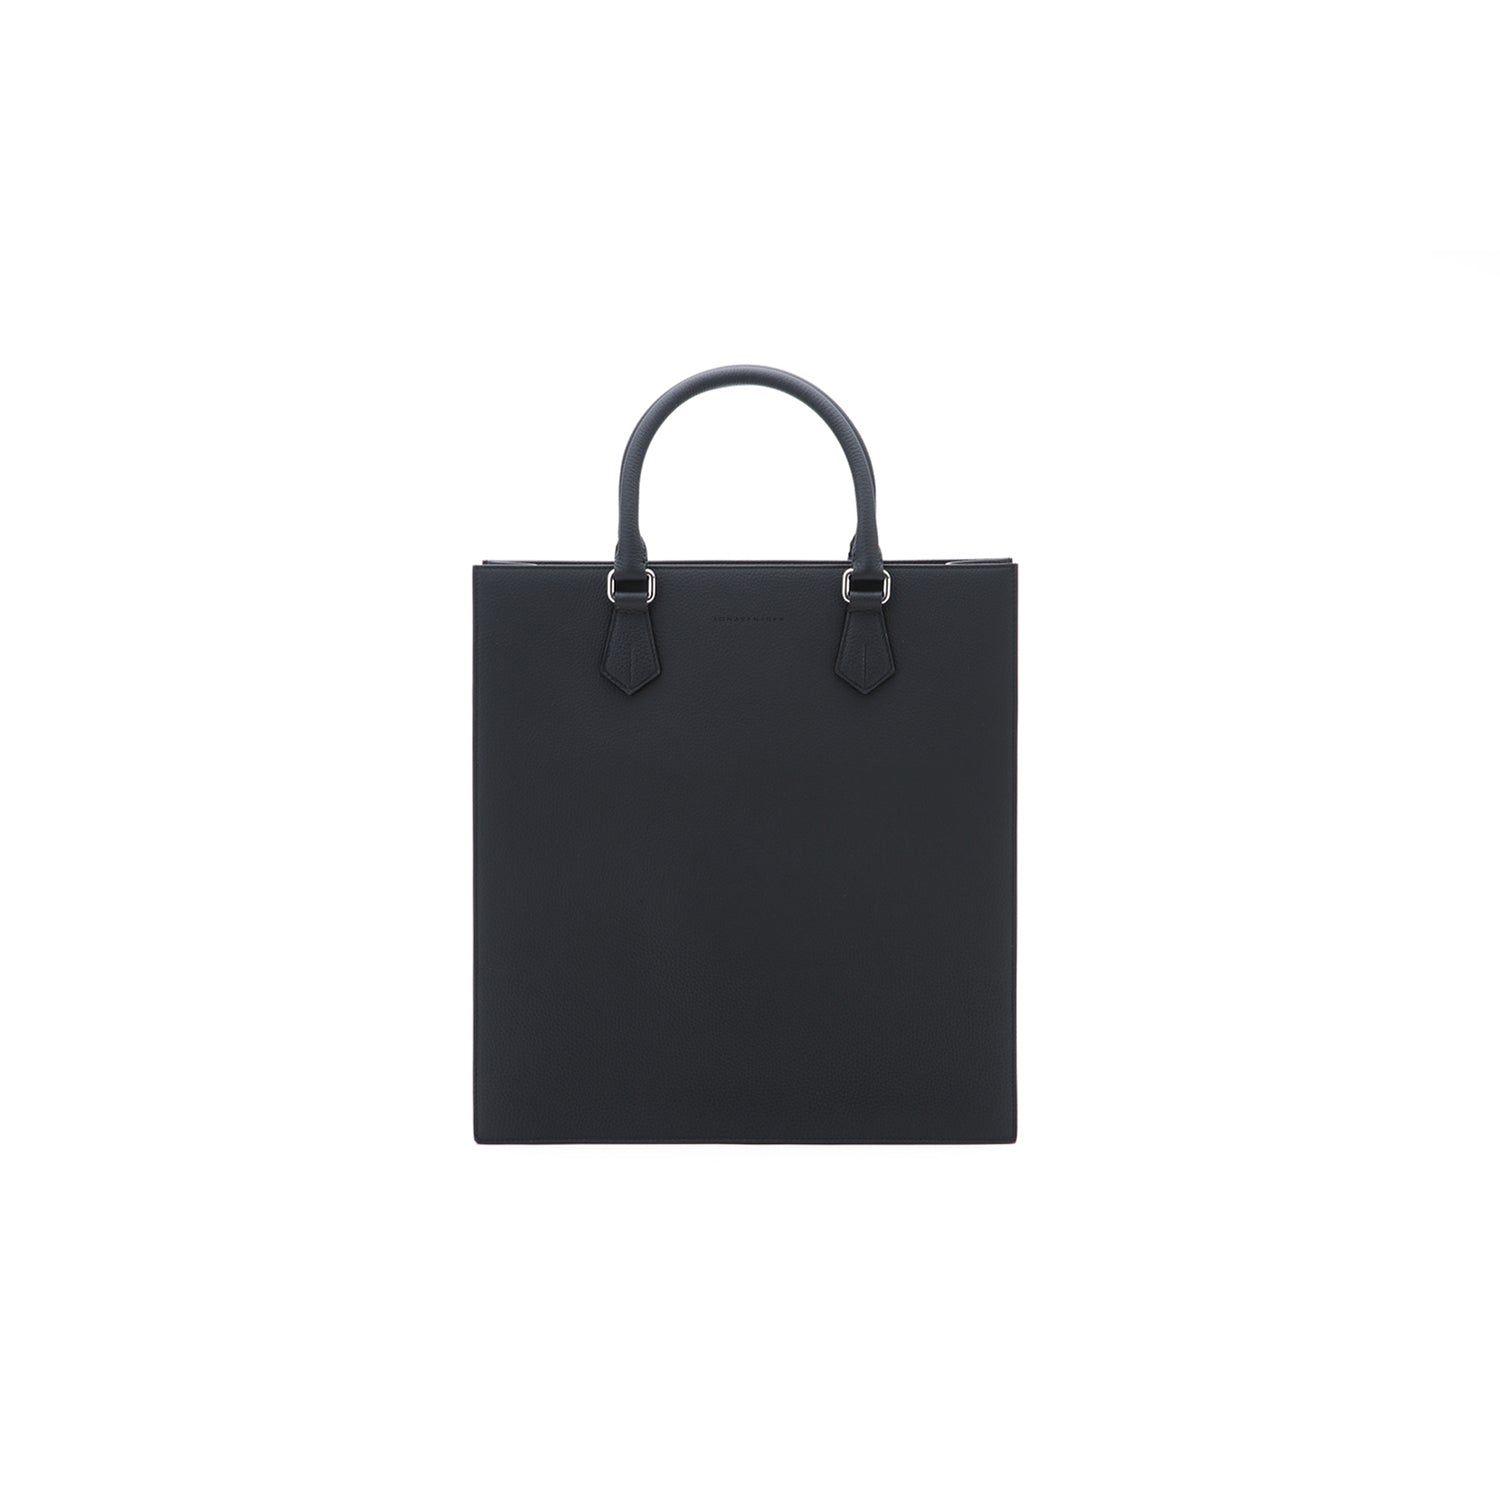 Marco Tote Bag in Shrink Leather Black